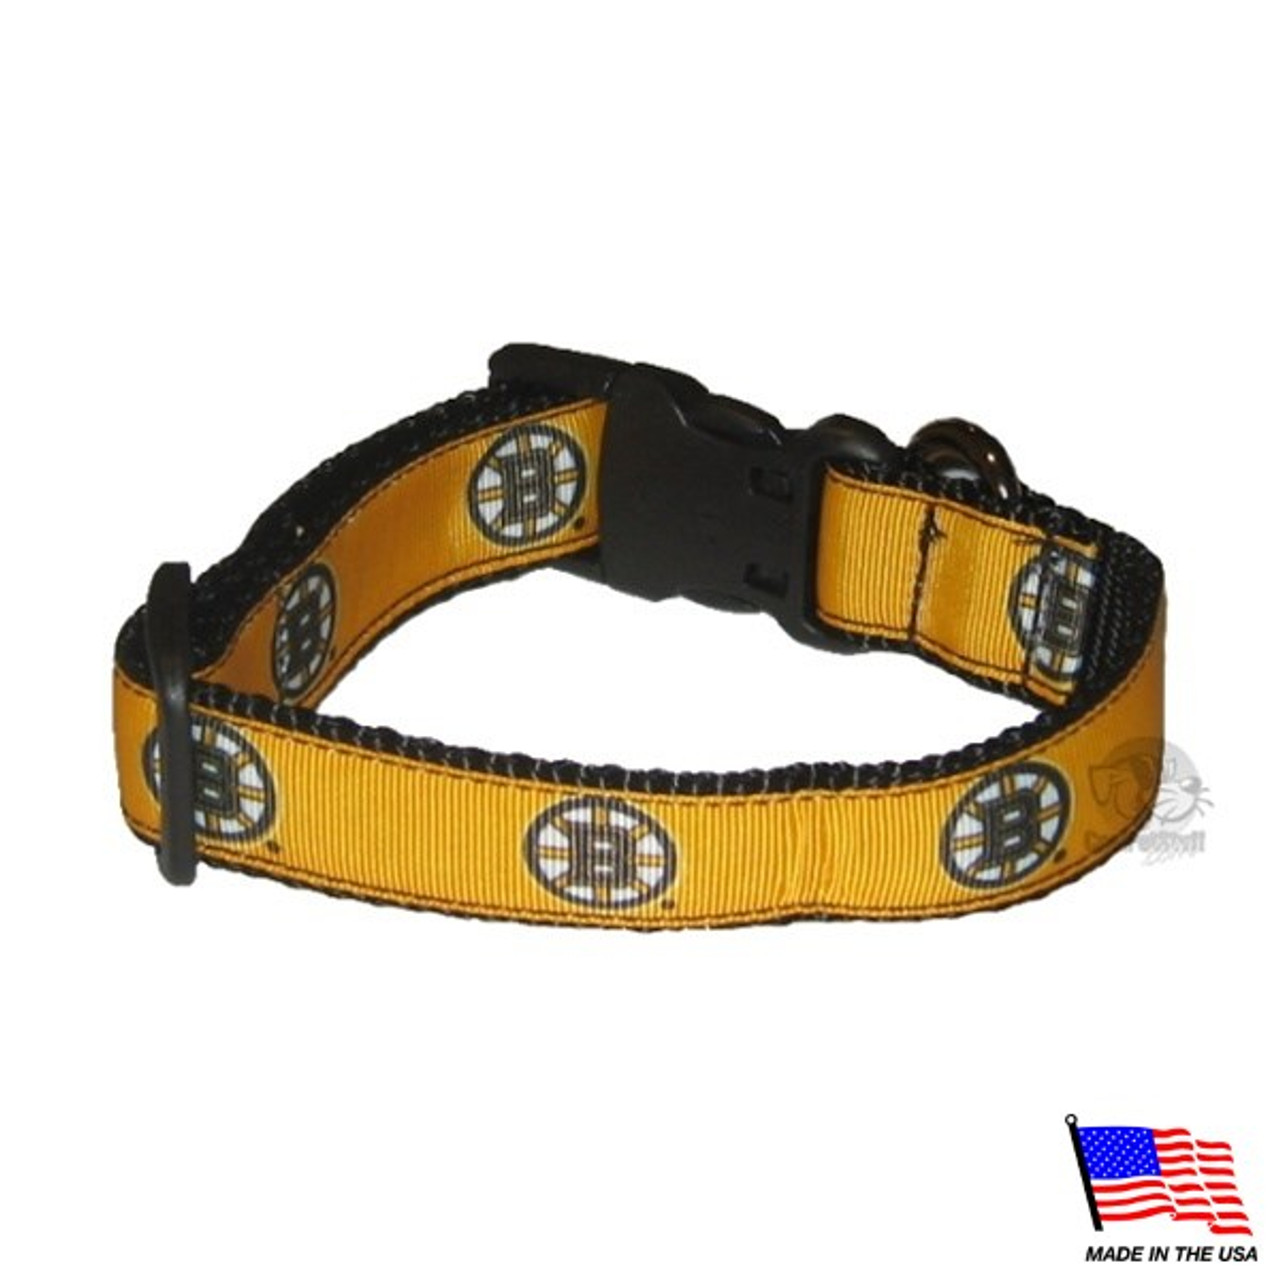 All Star Dogs: Boston Bruins Pet Products